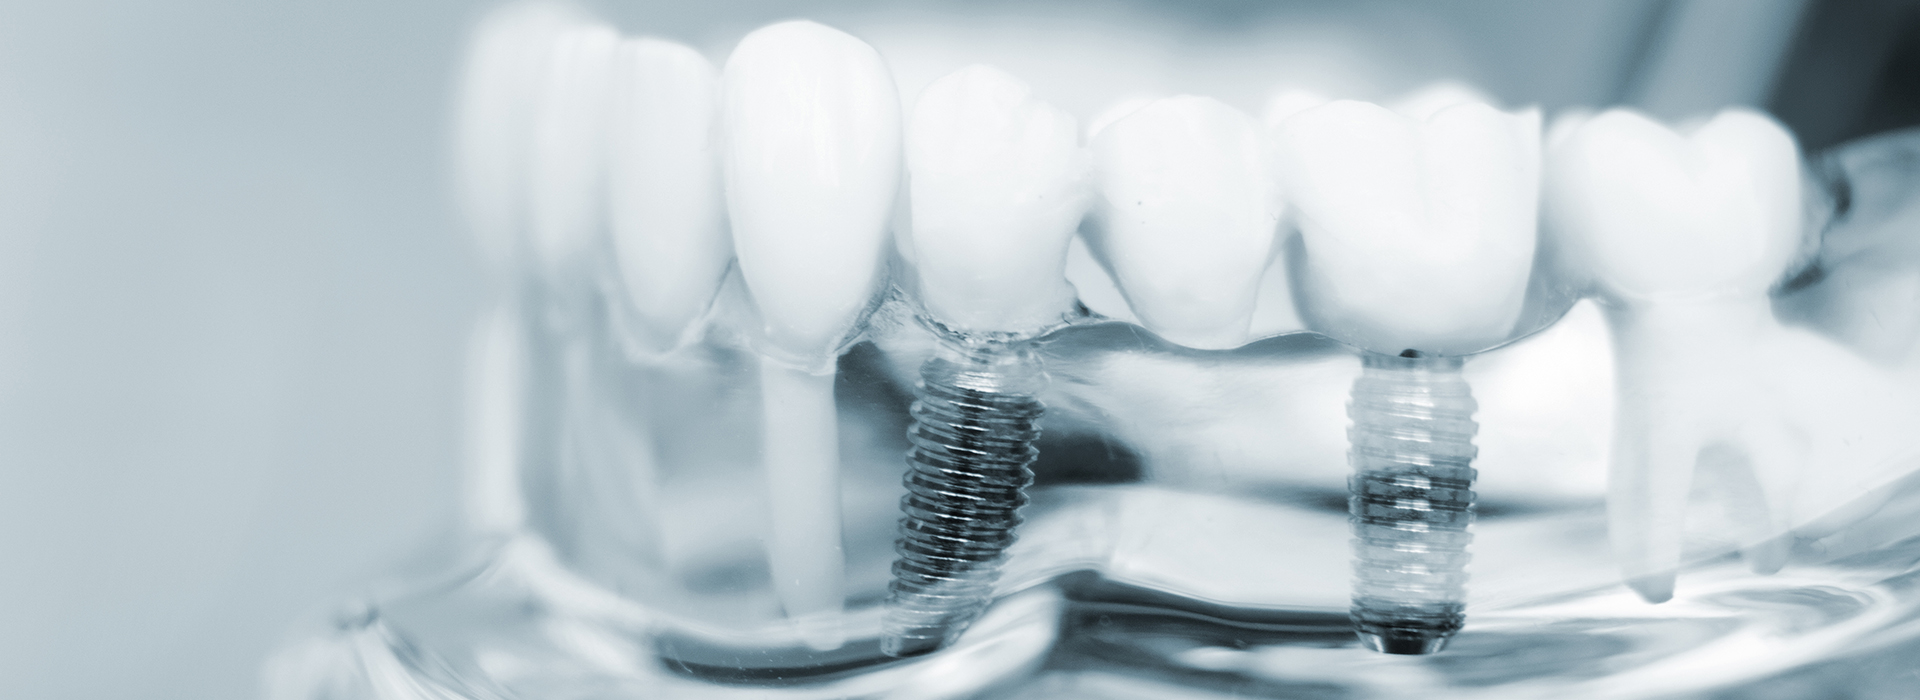 The image shows a close-up of multiple teeth with visible toothpaste and water droplets, suggesting an advertisement or demonstration related to oral hygiene.